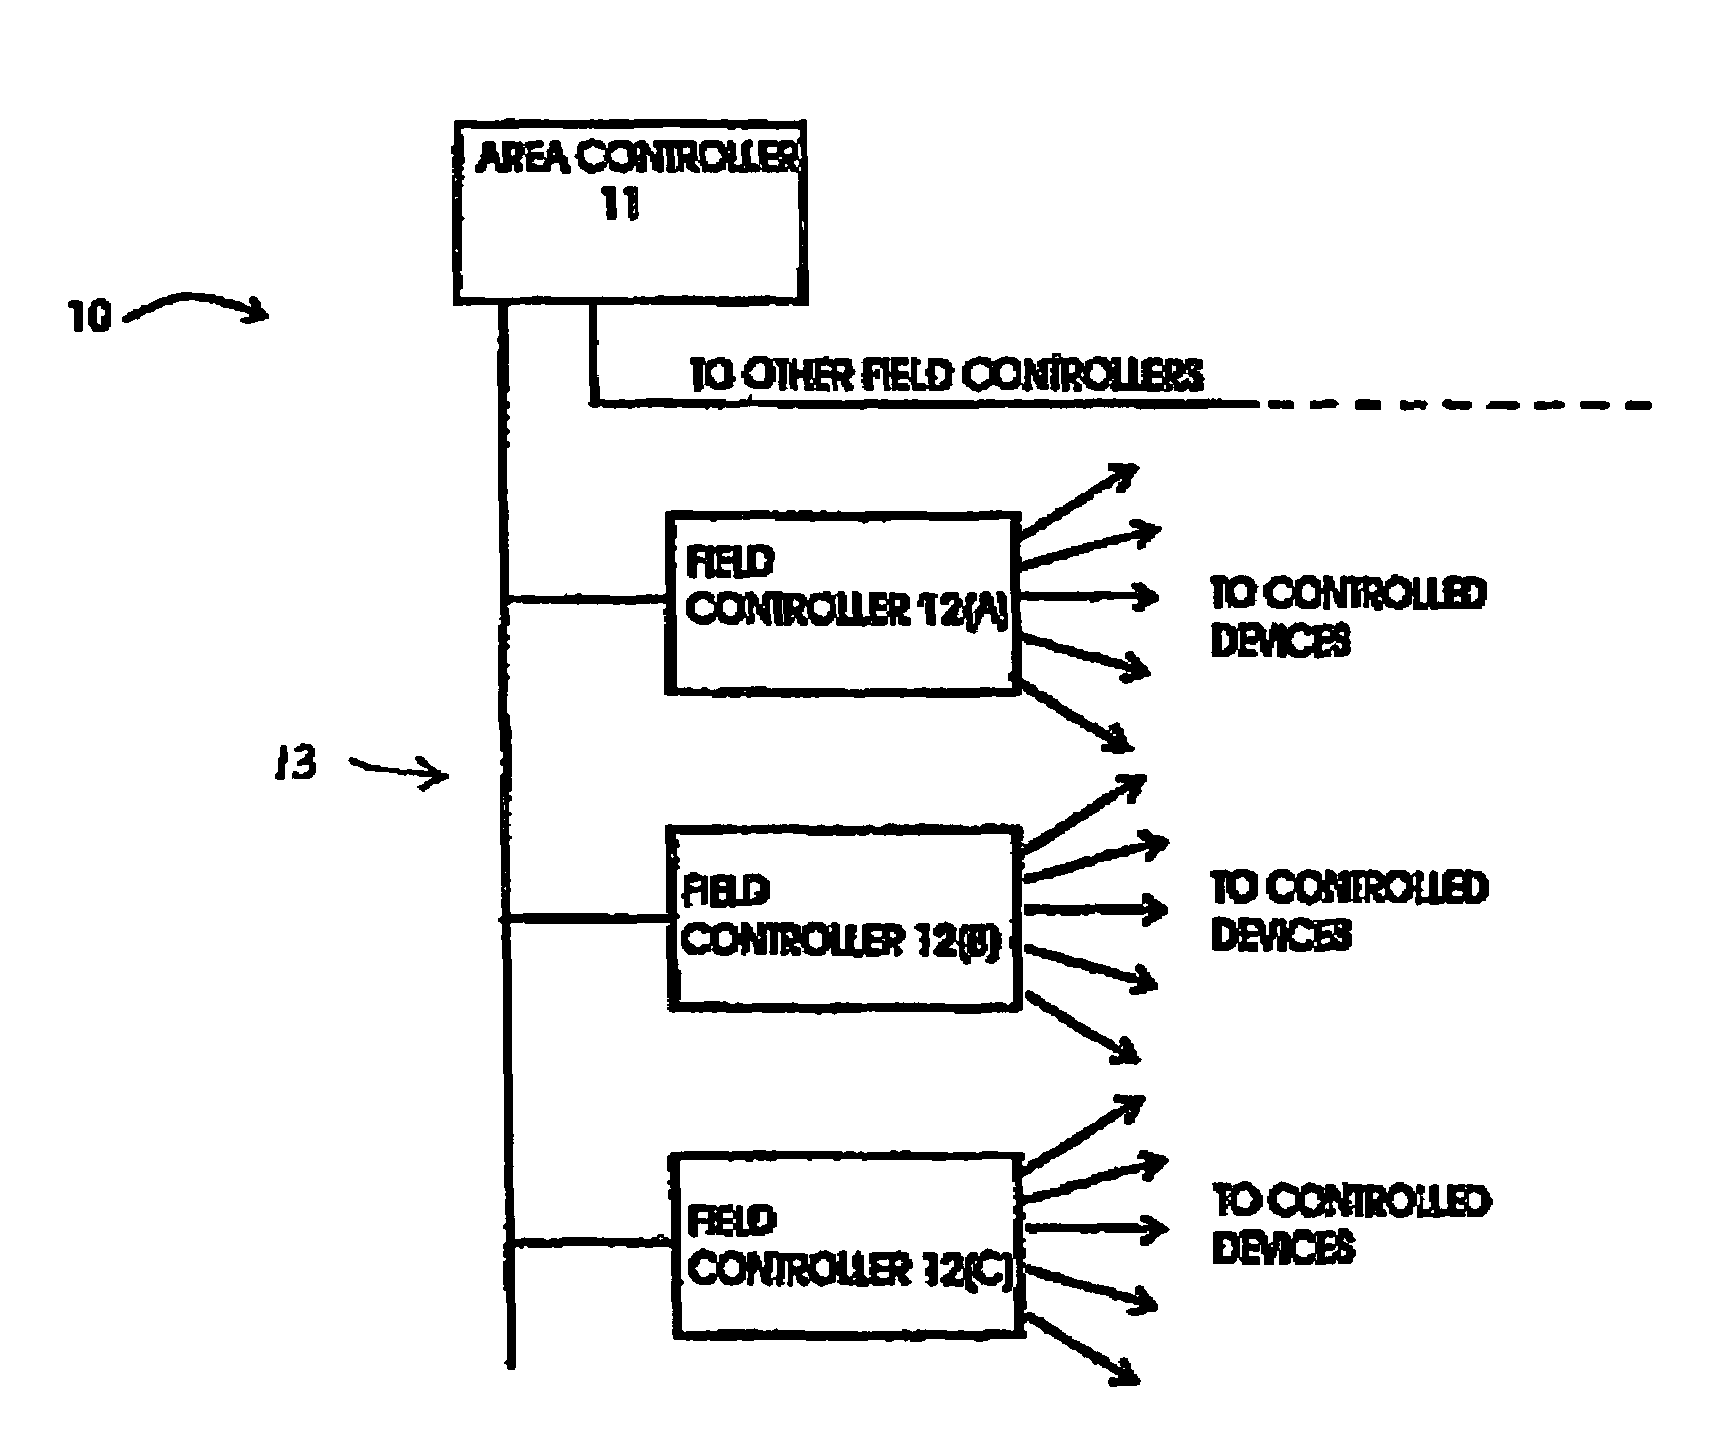 Distributed control system with multiple control levels and/or downloading